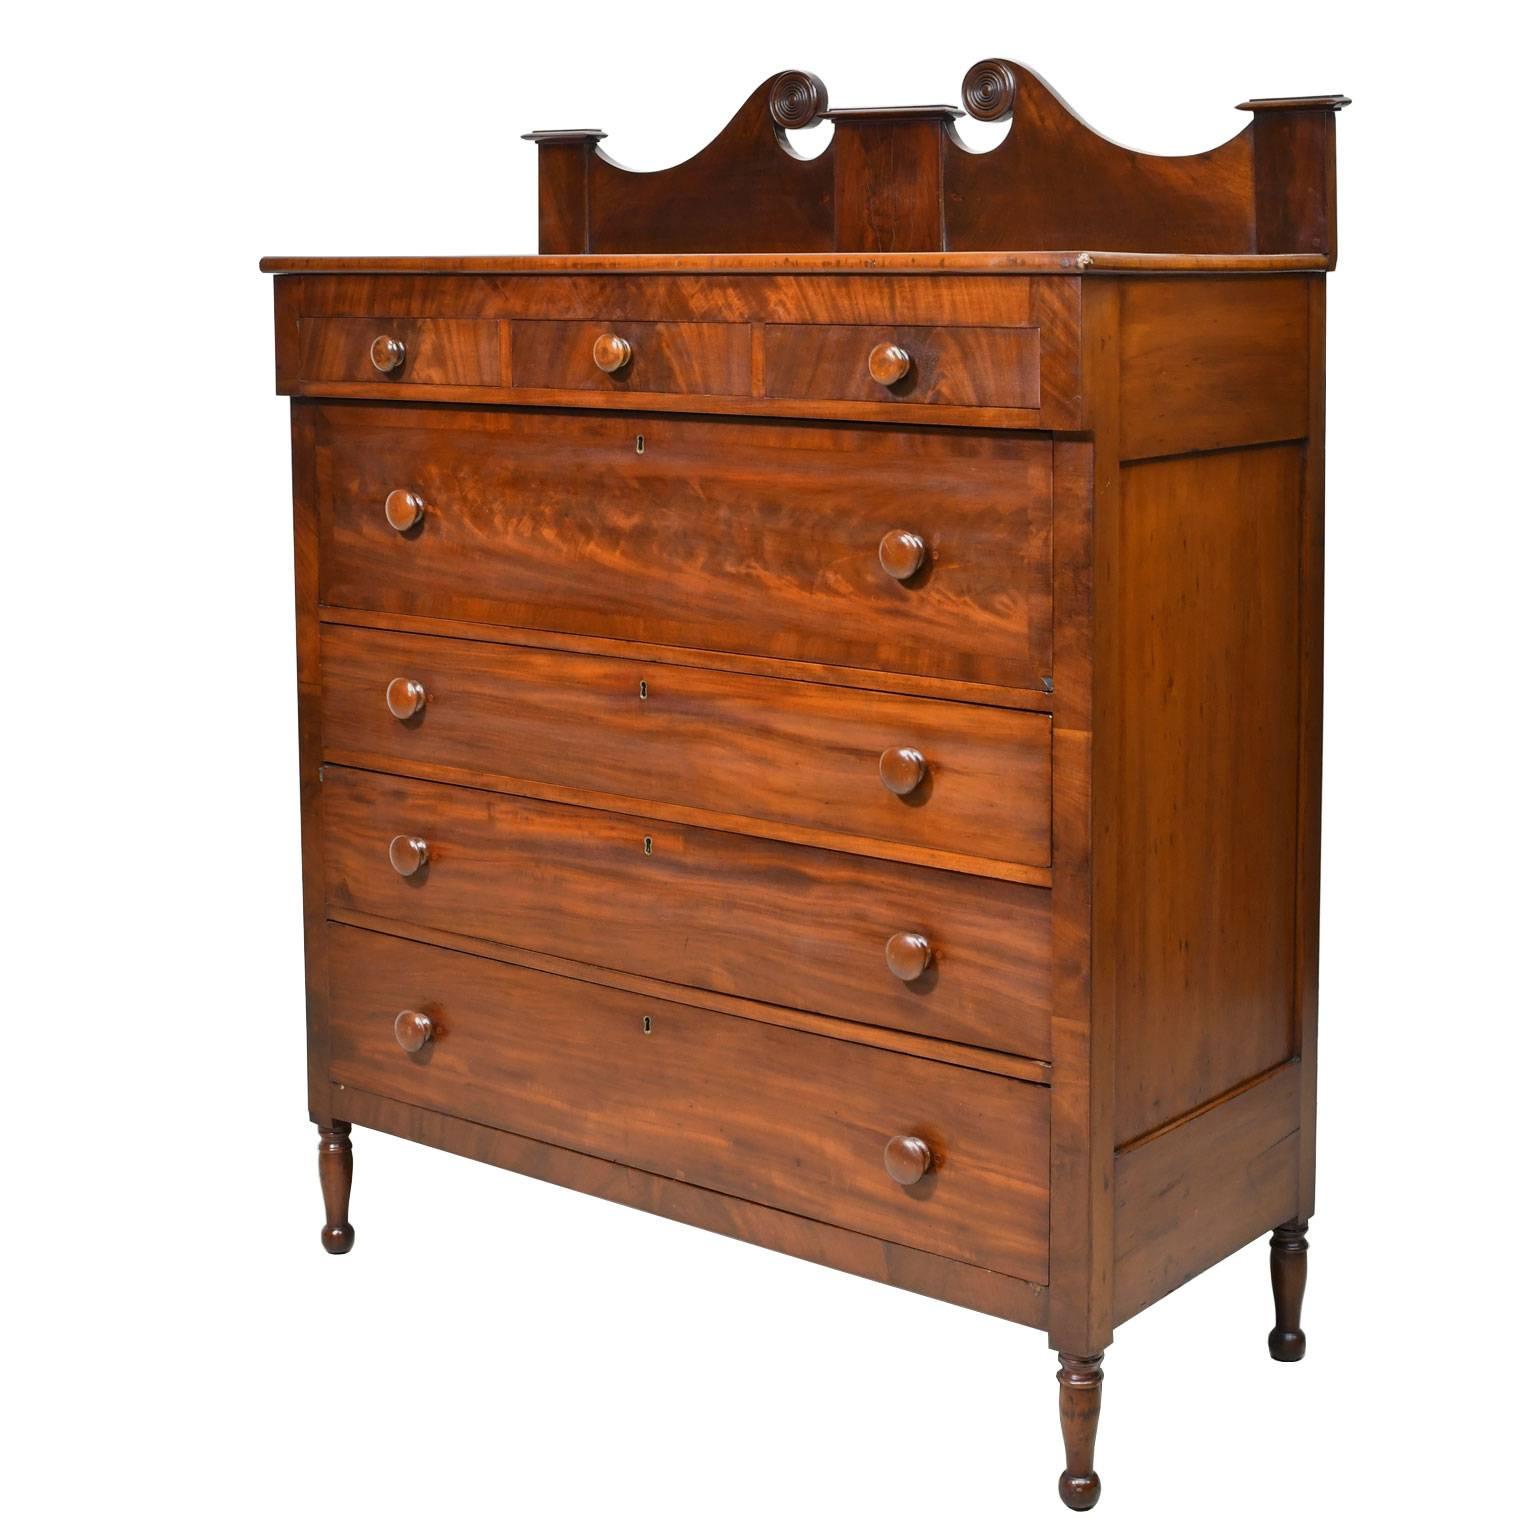 Turned American Sheraton Chest of Drawers in Mahogany, circa 1815